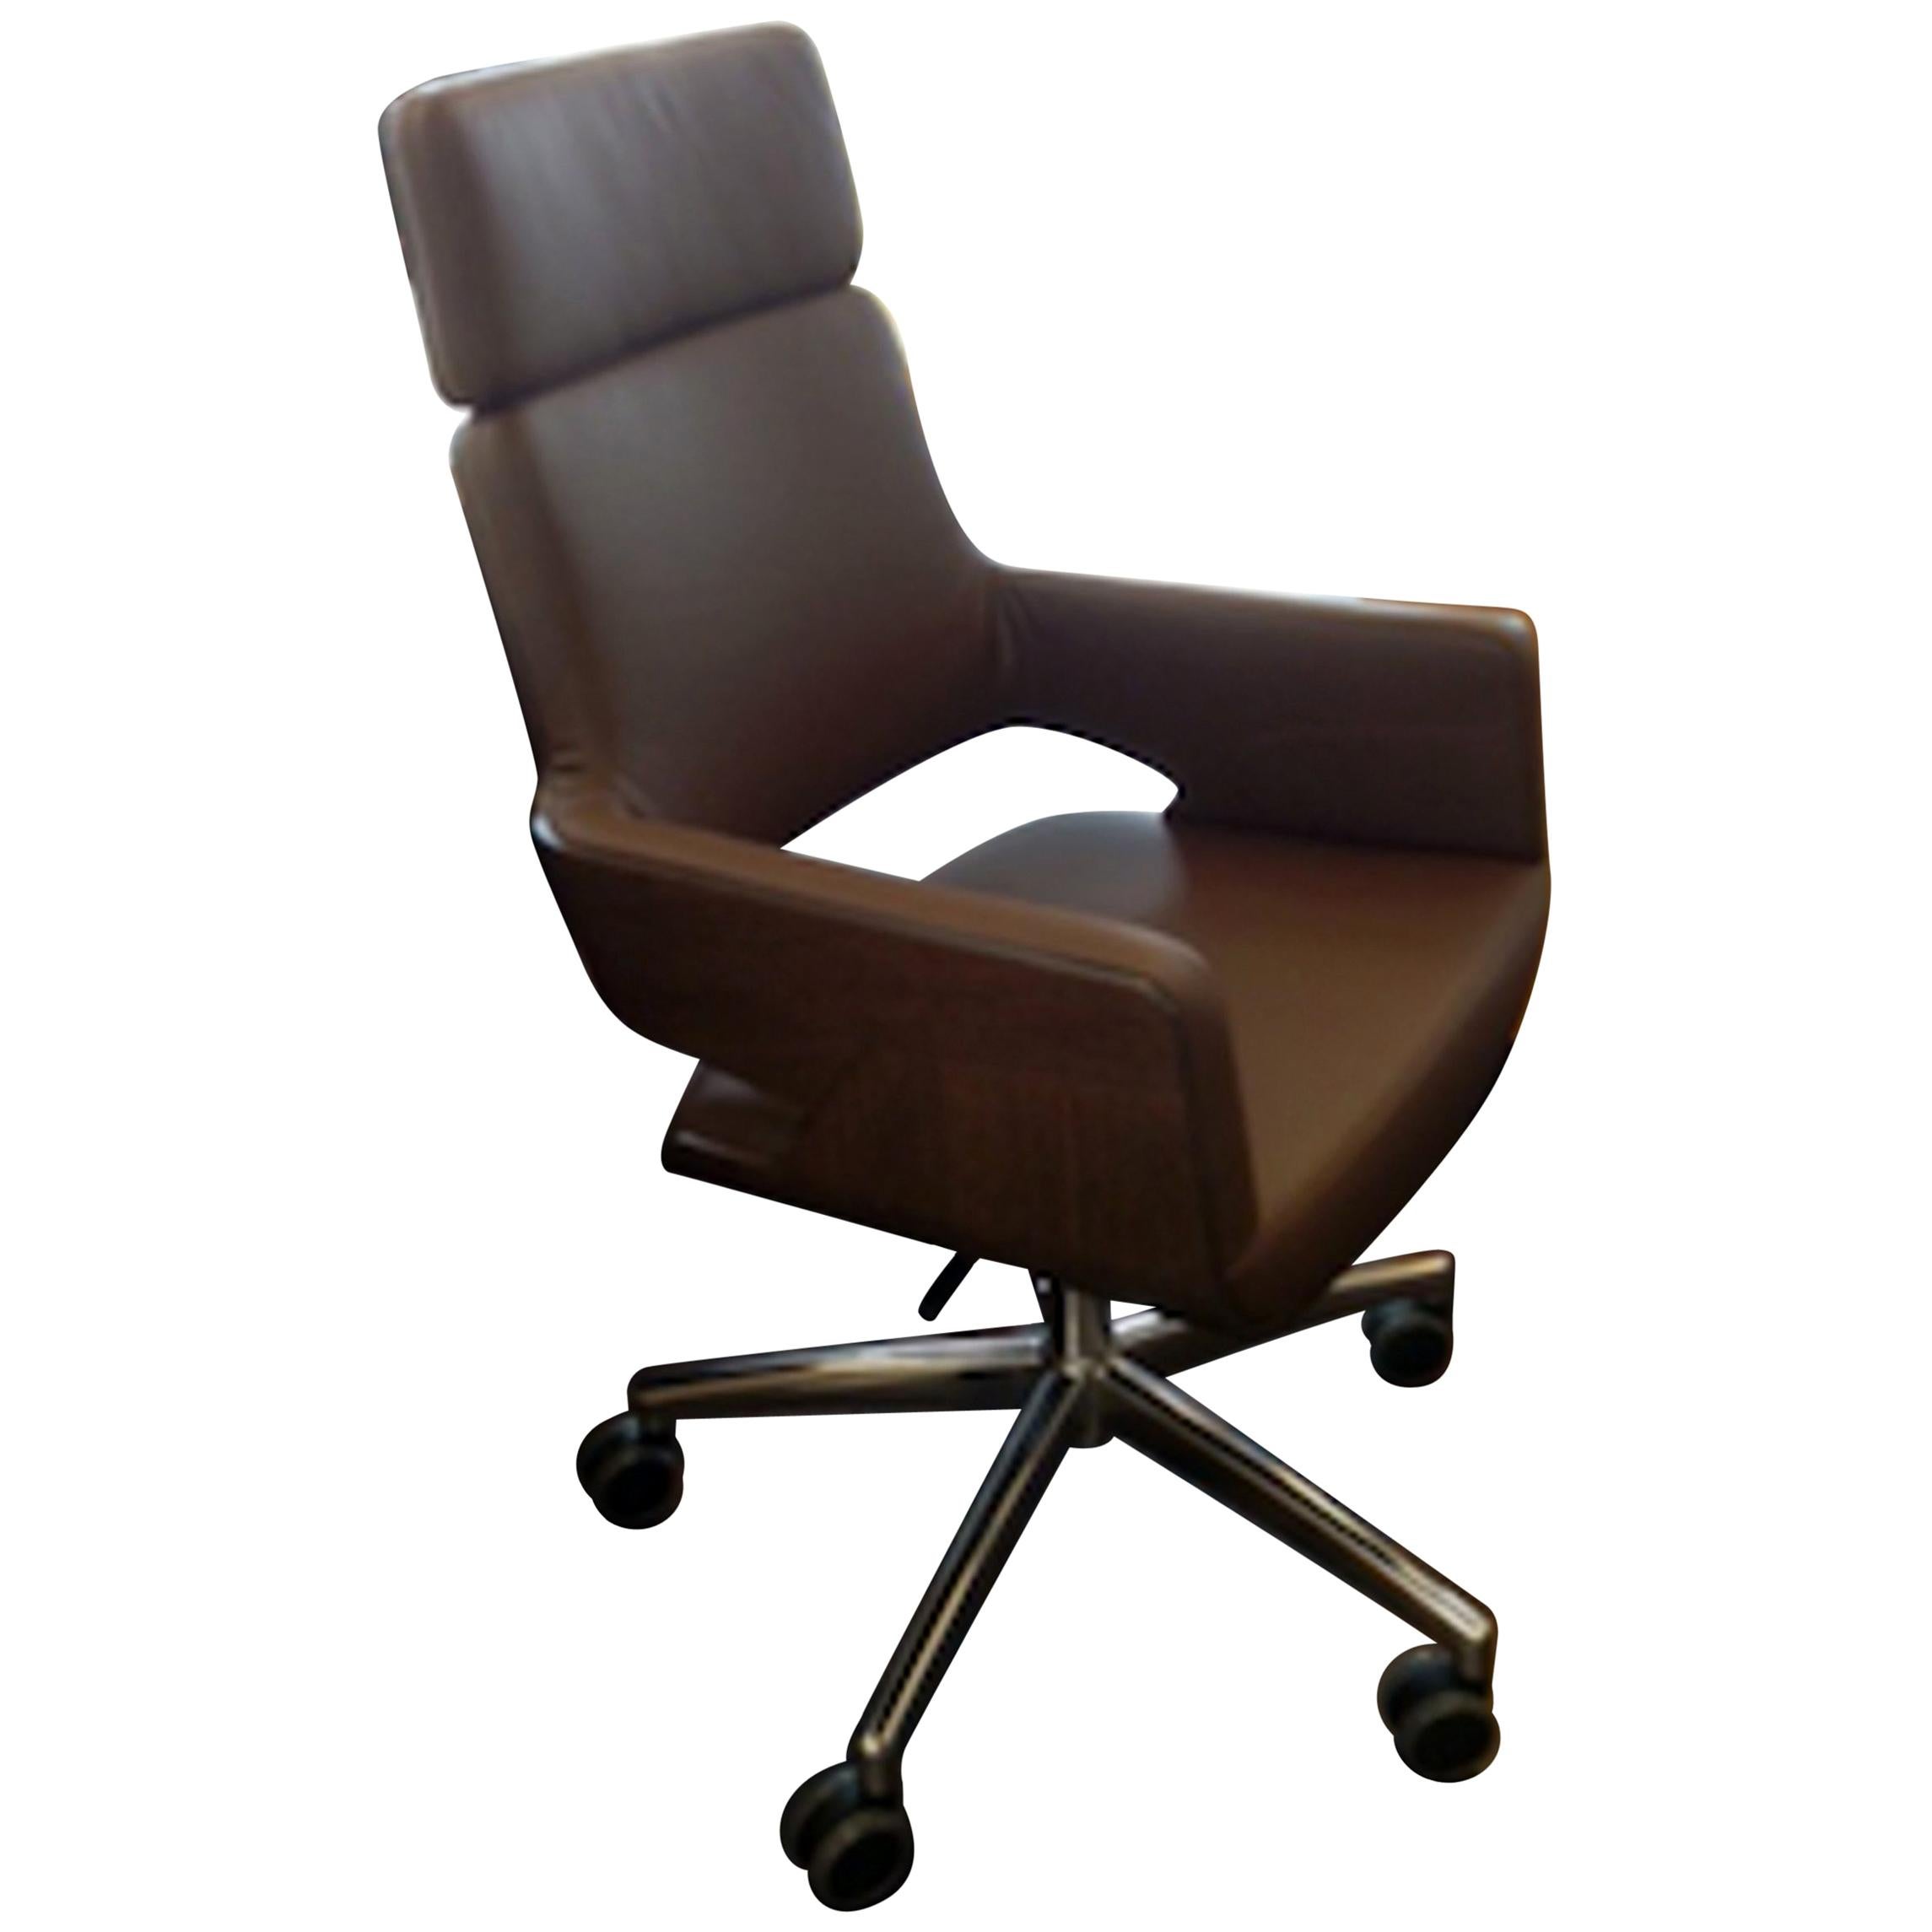 S845 Thonet Executive Swivel Brown Leather Armchair on Casters